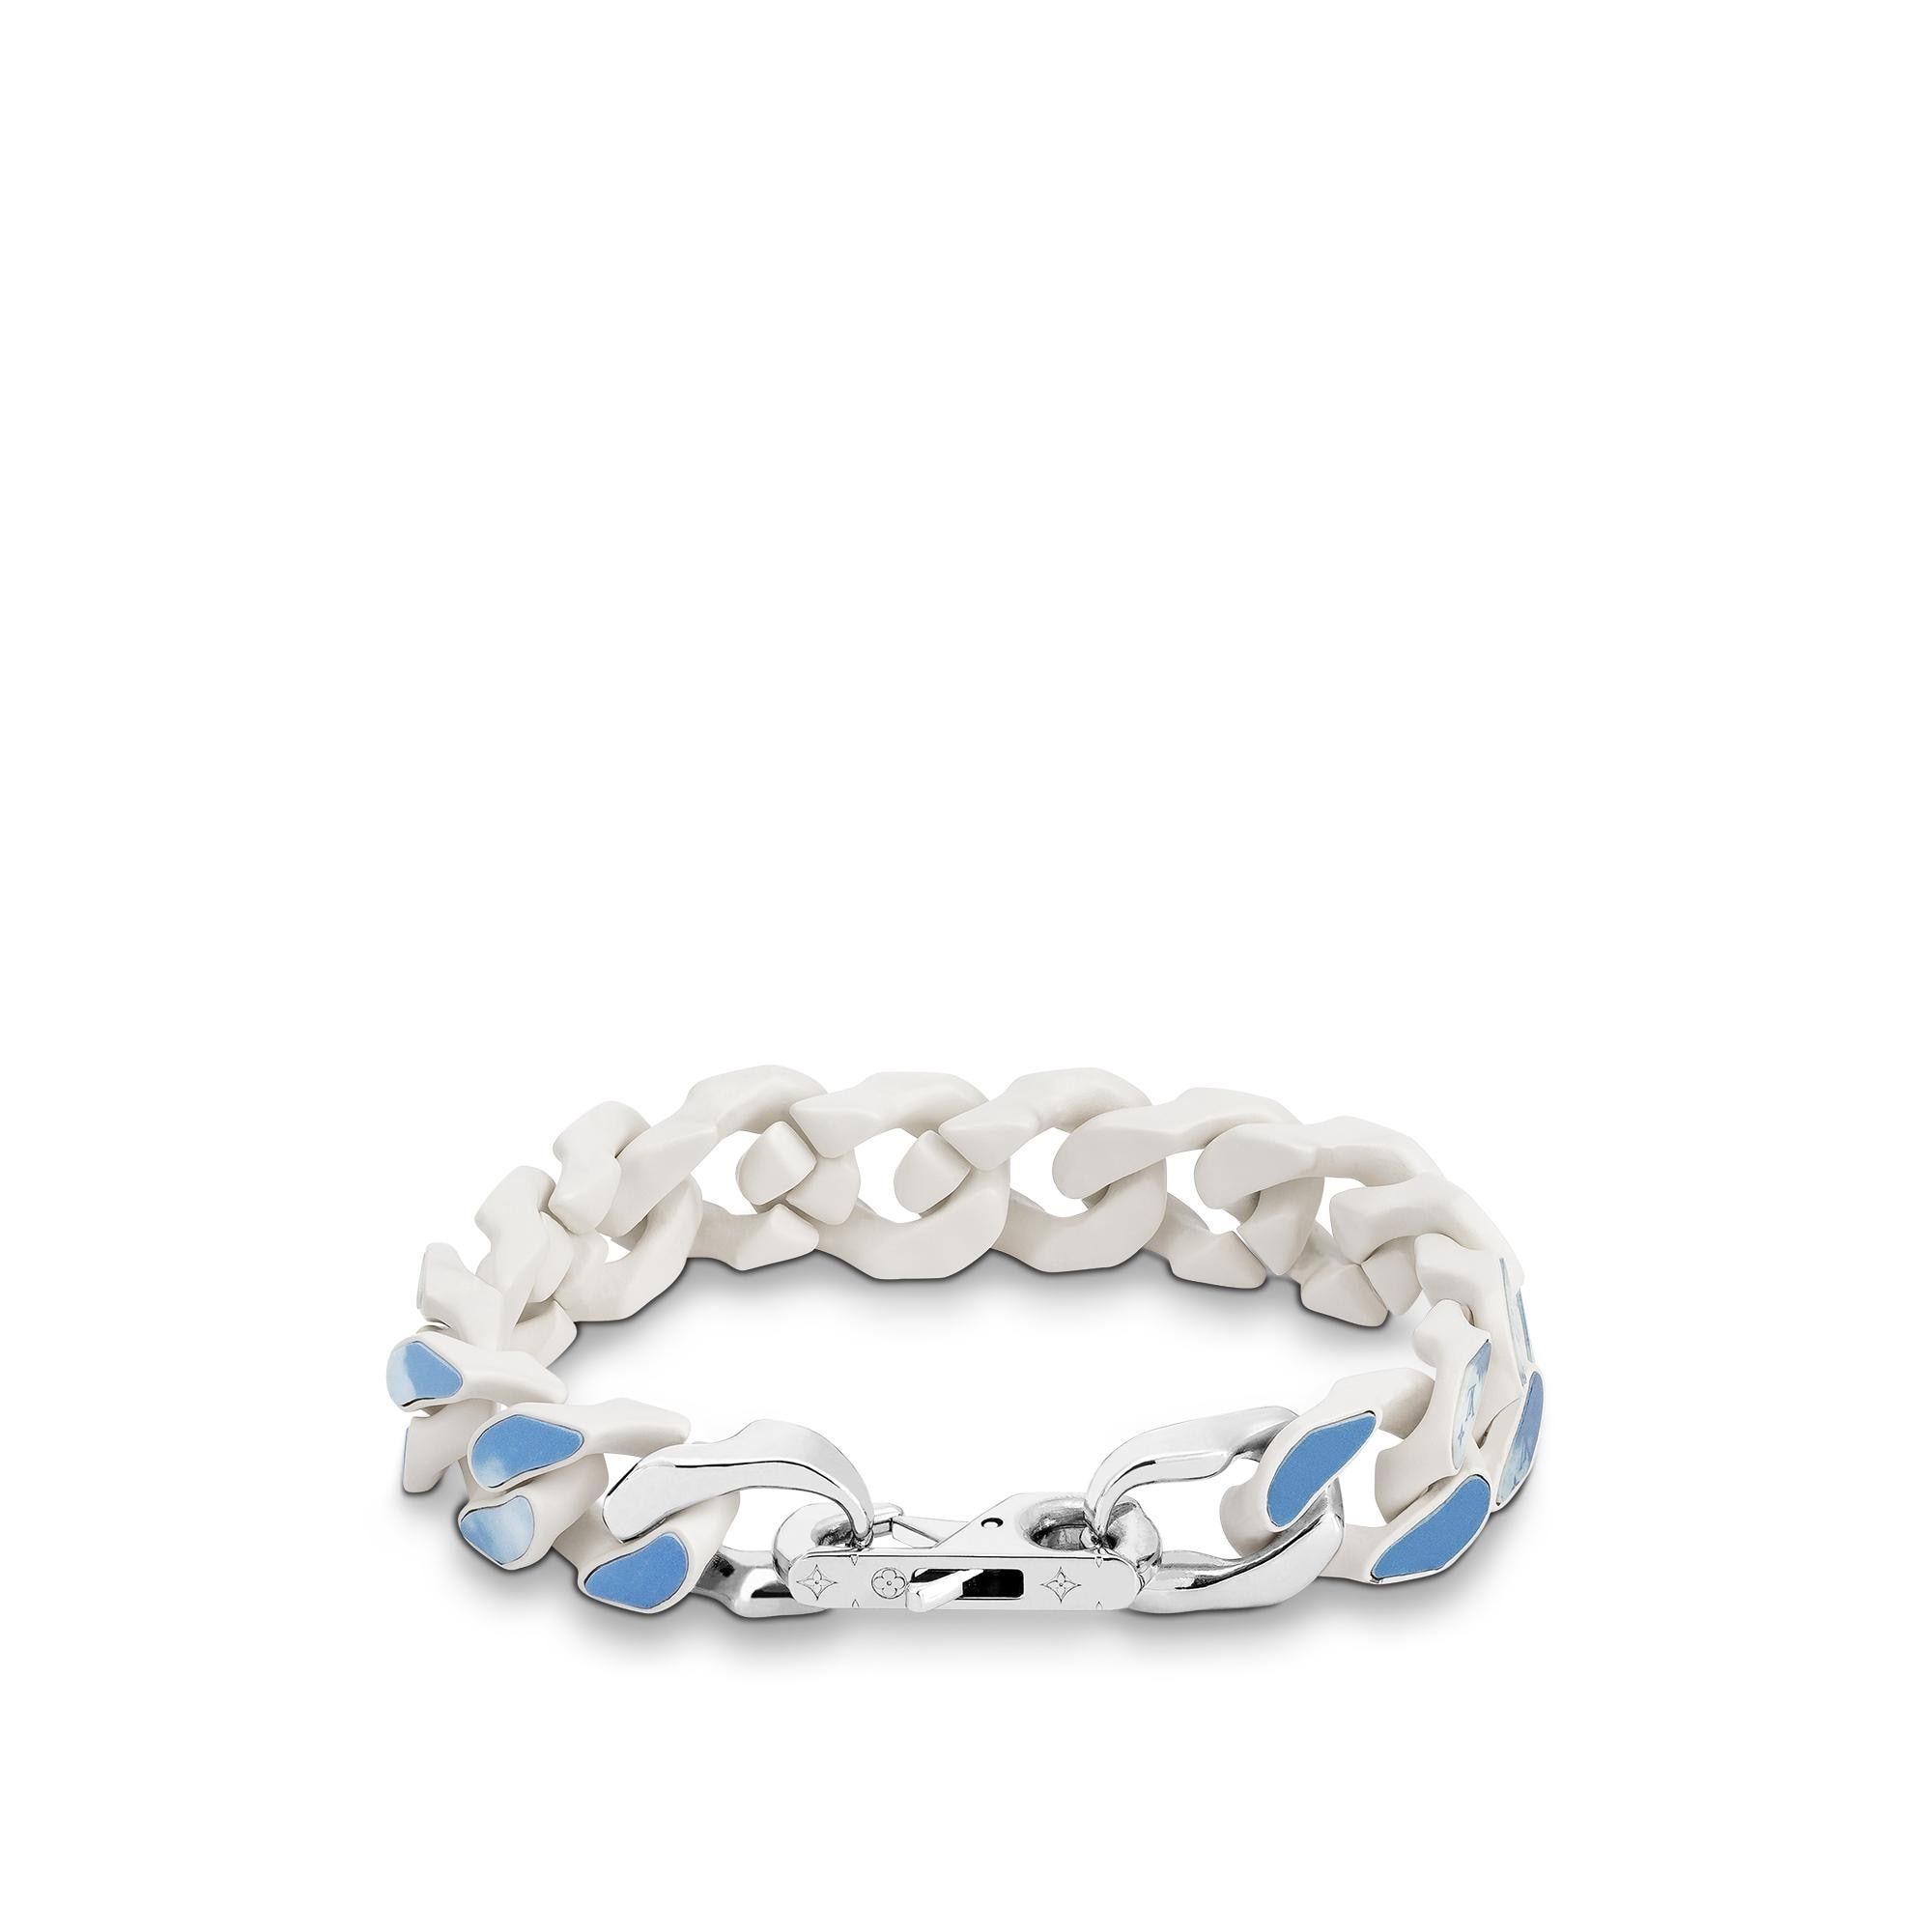 Mens Monogram Clouds Chain Bracelet From Superplayer001, $60.92